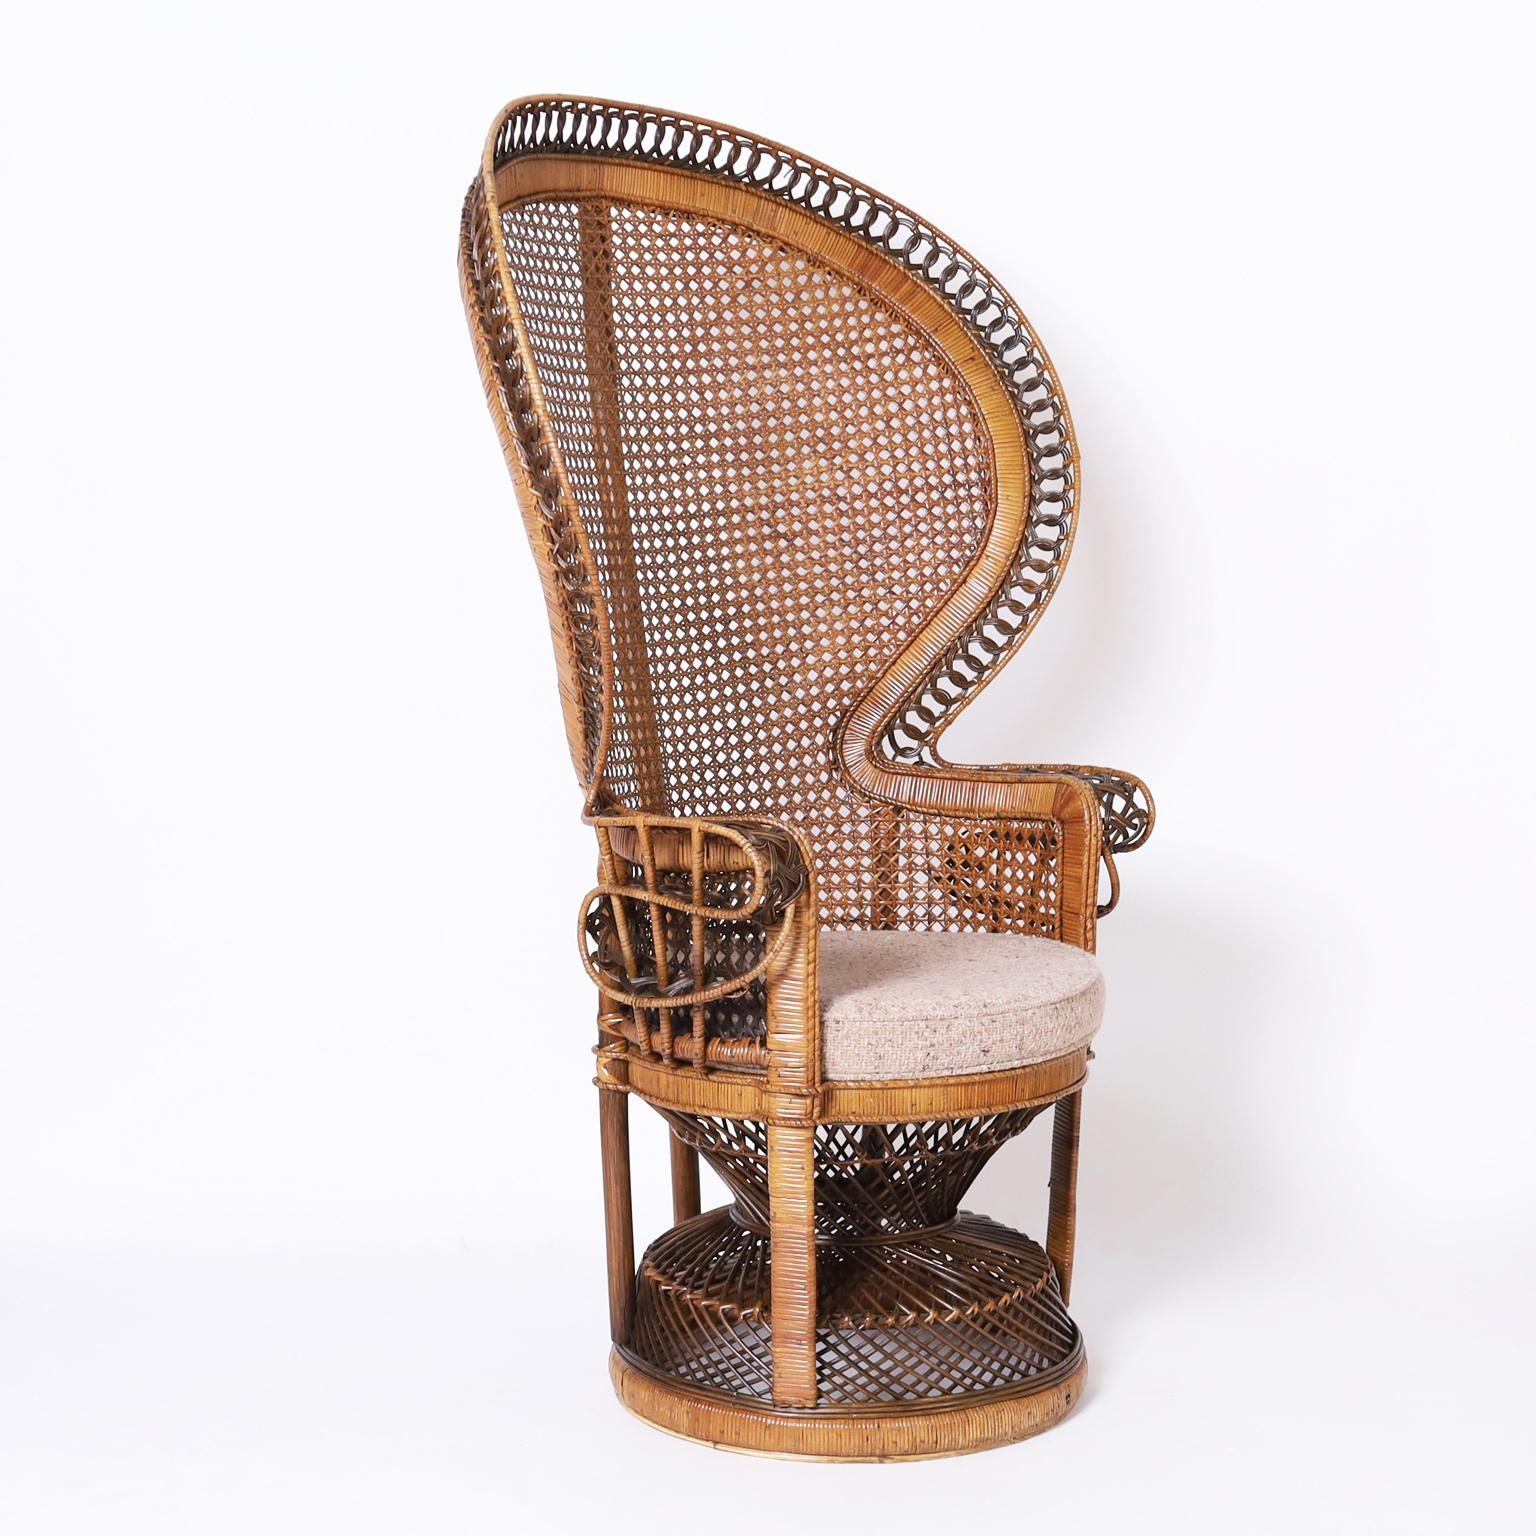 Vintage British Colonial style peacock chair crafted in wicker and rattan with a natural and stained palette on a classic exotic form.